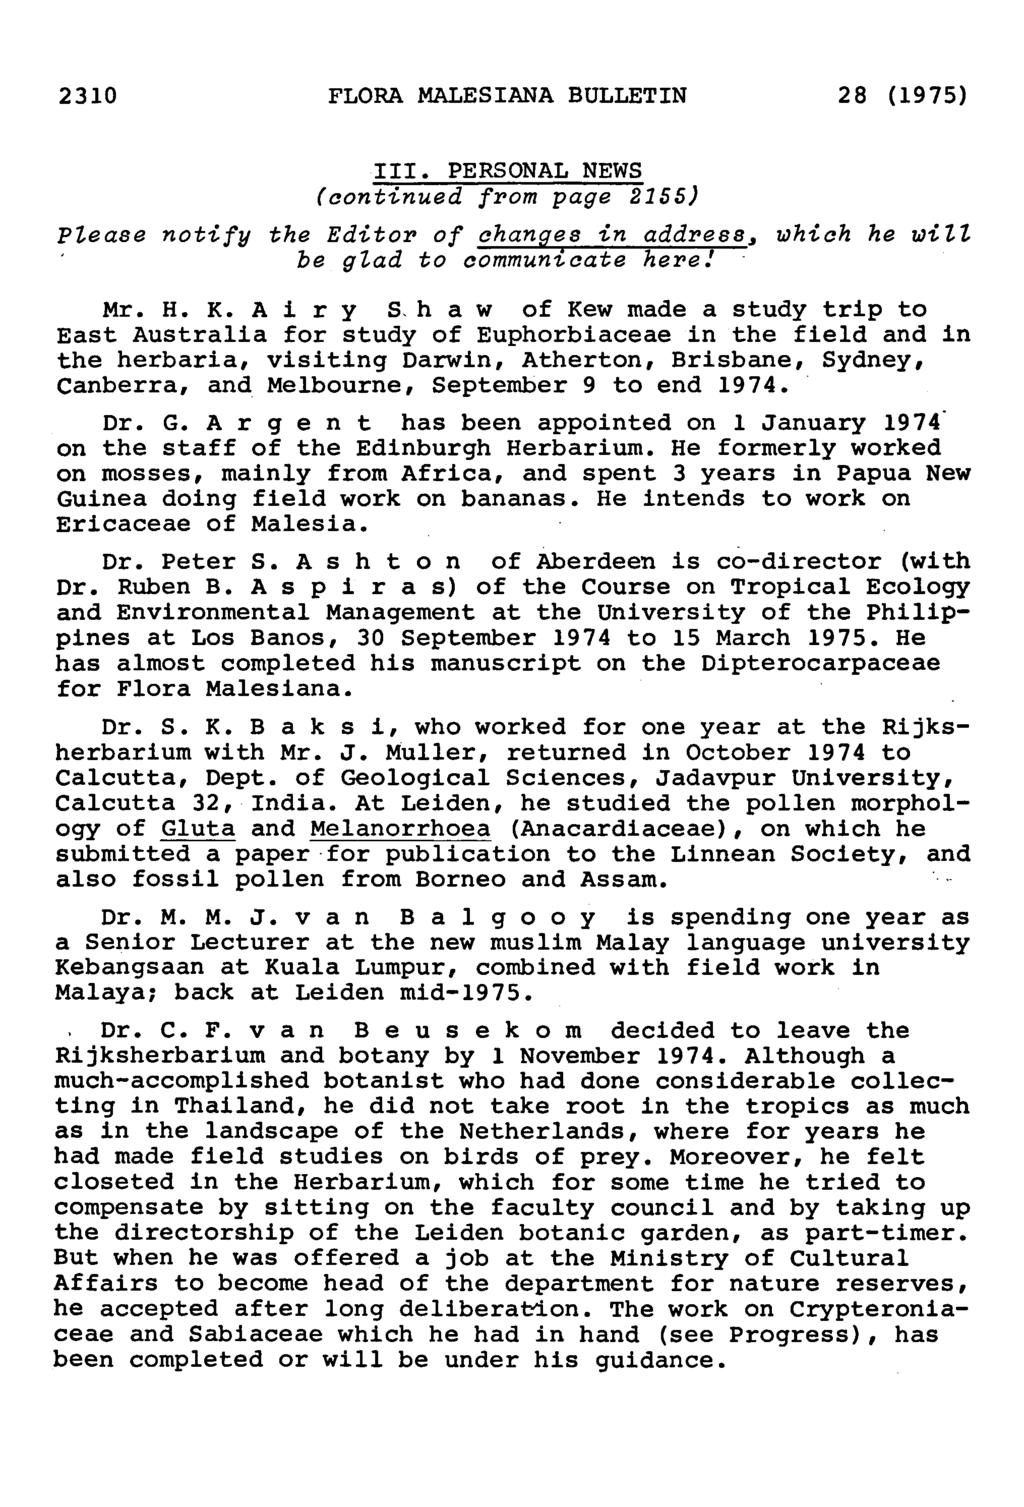 2310 FLORA MALESIANA BULLETIN 28 (1975) III. Personal News (continued from page 2155) Please notify the Editor of changes in address, which he will he glad to commumcate here! Mr. H.K.